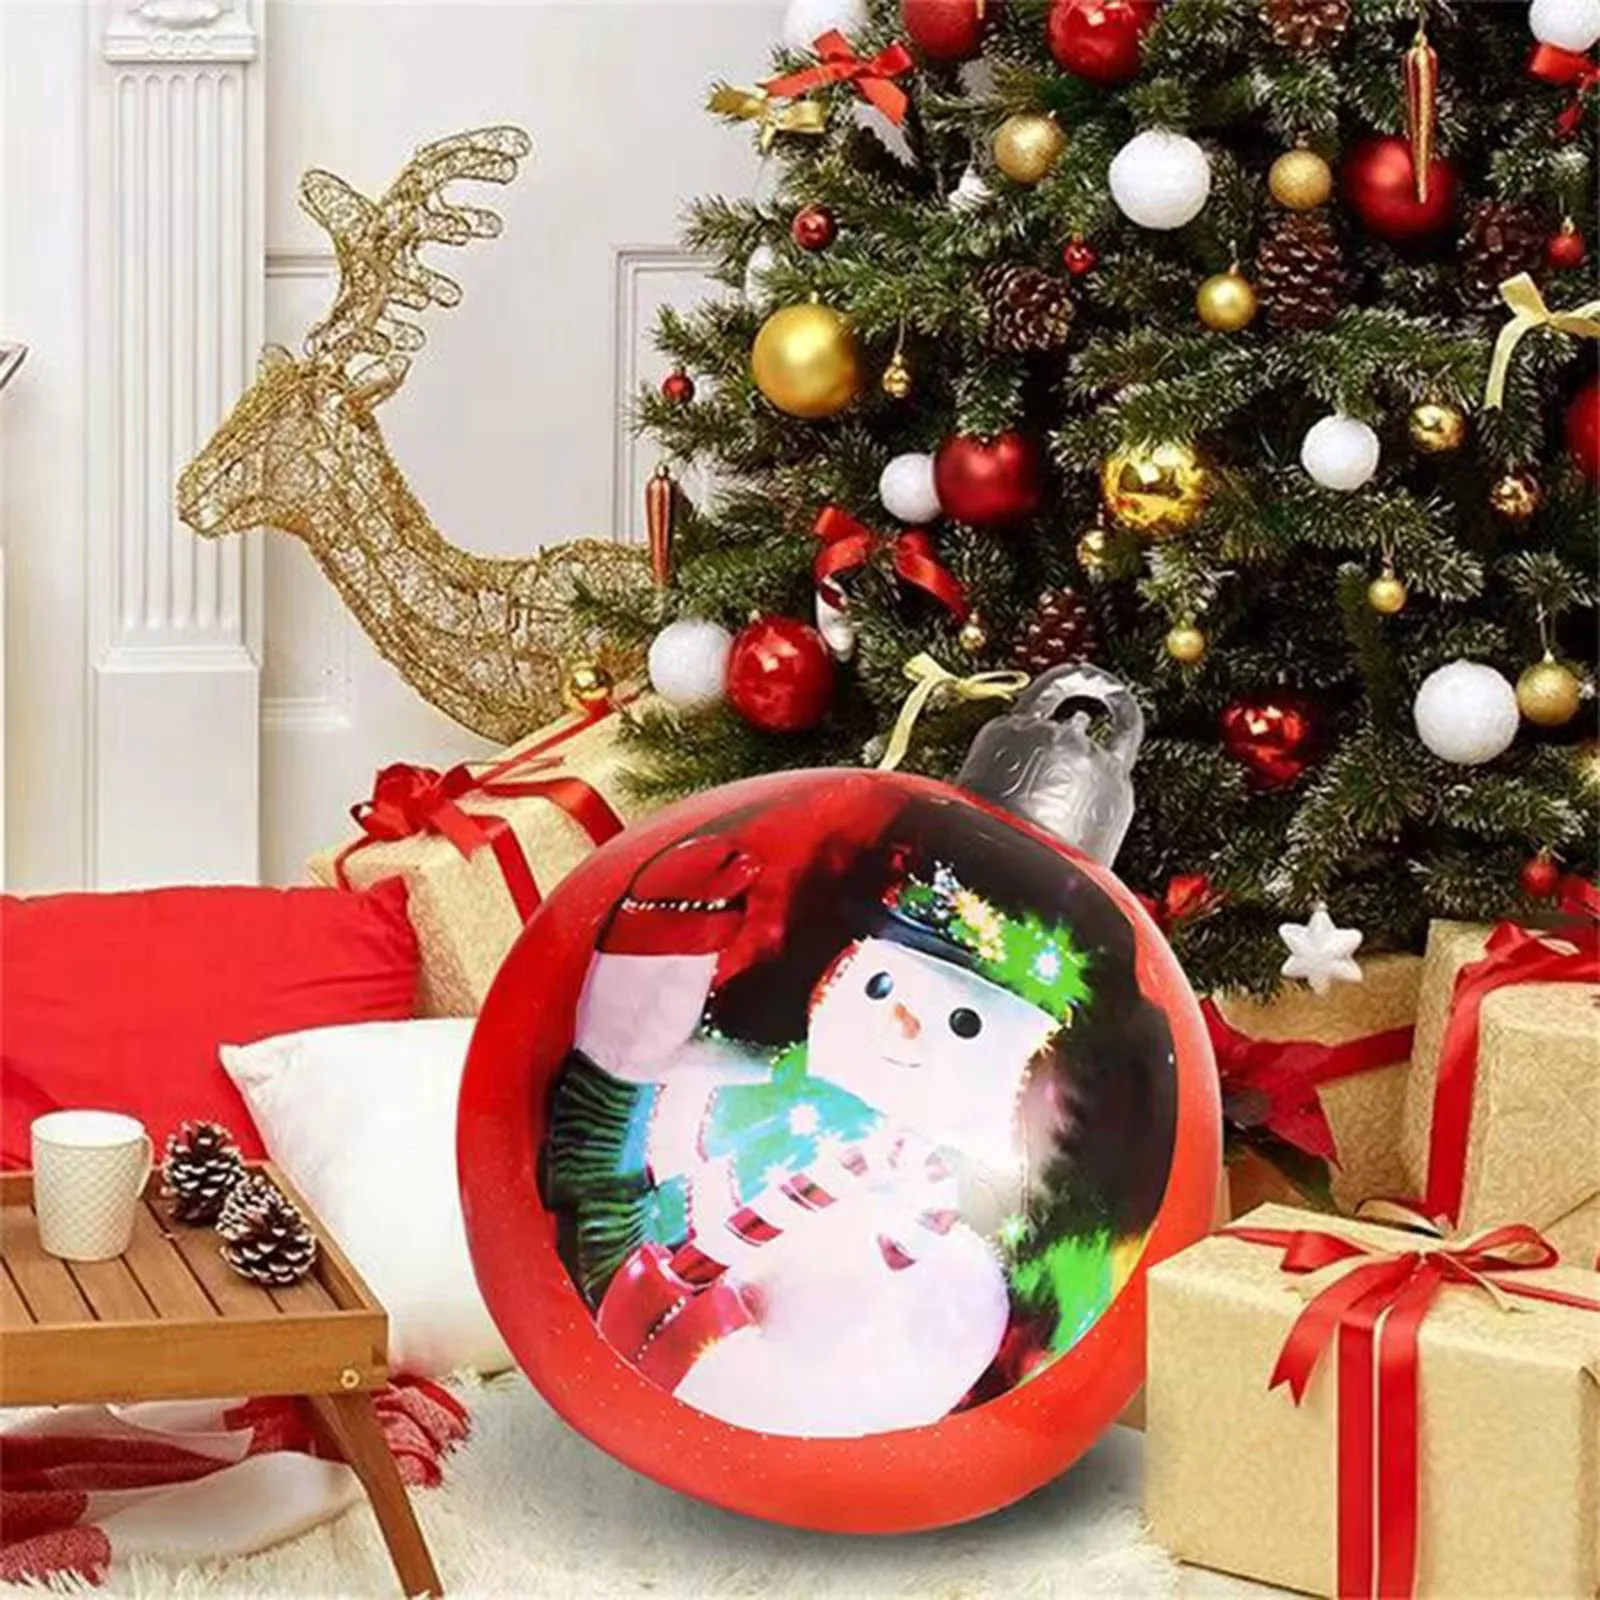 New Christmas Ornaments 23.6Inch Christmas Balls Outdoor Atmosphere PVC Inflatable Toys for Home Christmas Festive Gift Ball Xmas A 